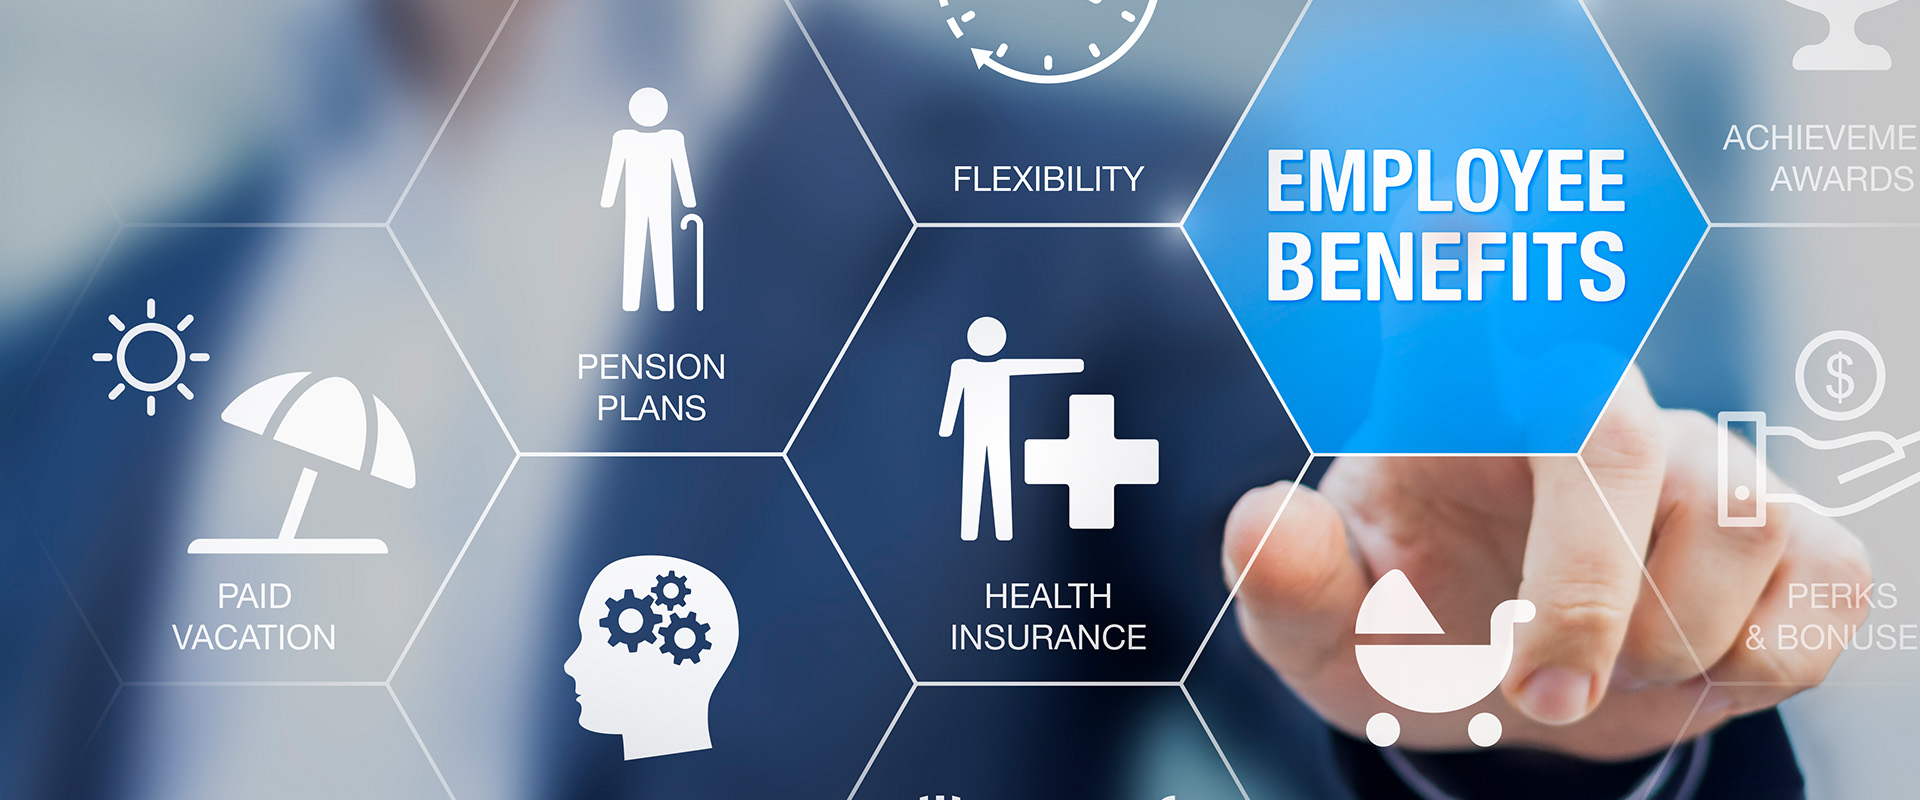 6 Ways to Get the Most from Your Employee Benefits